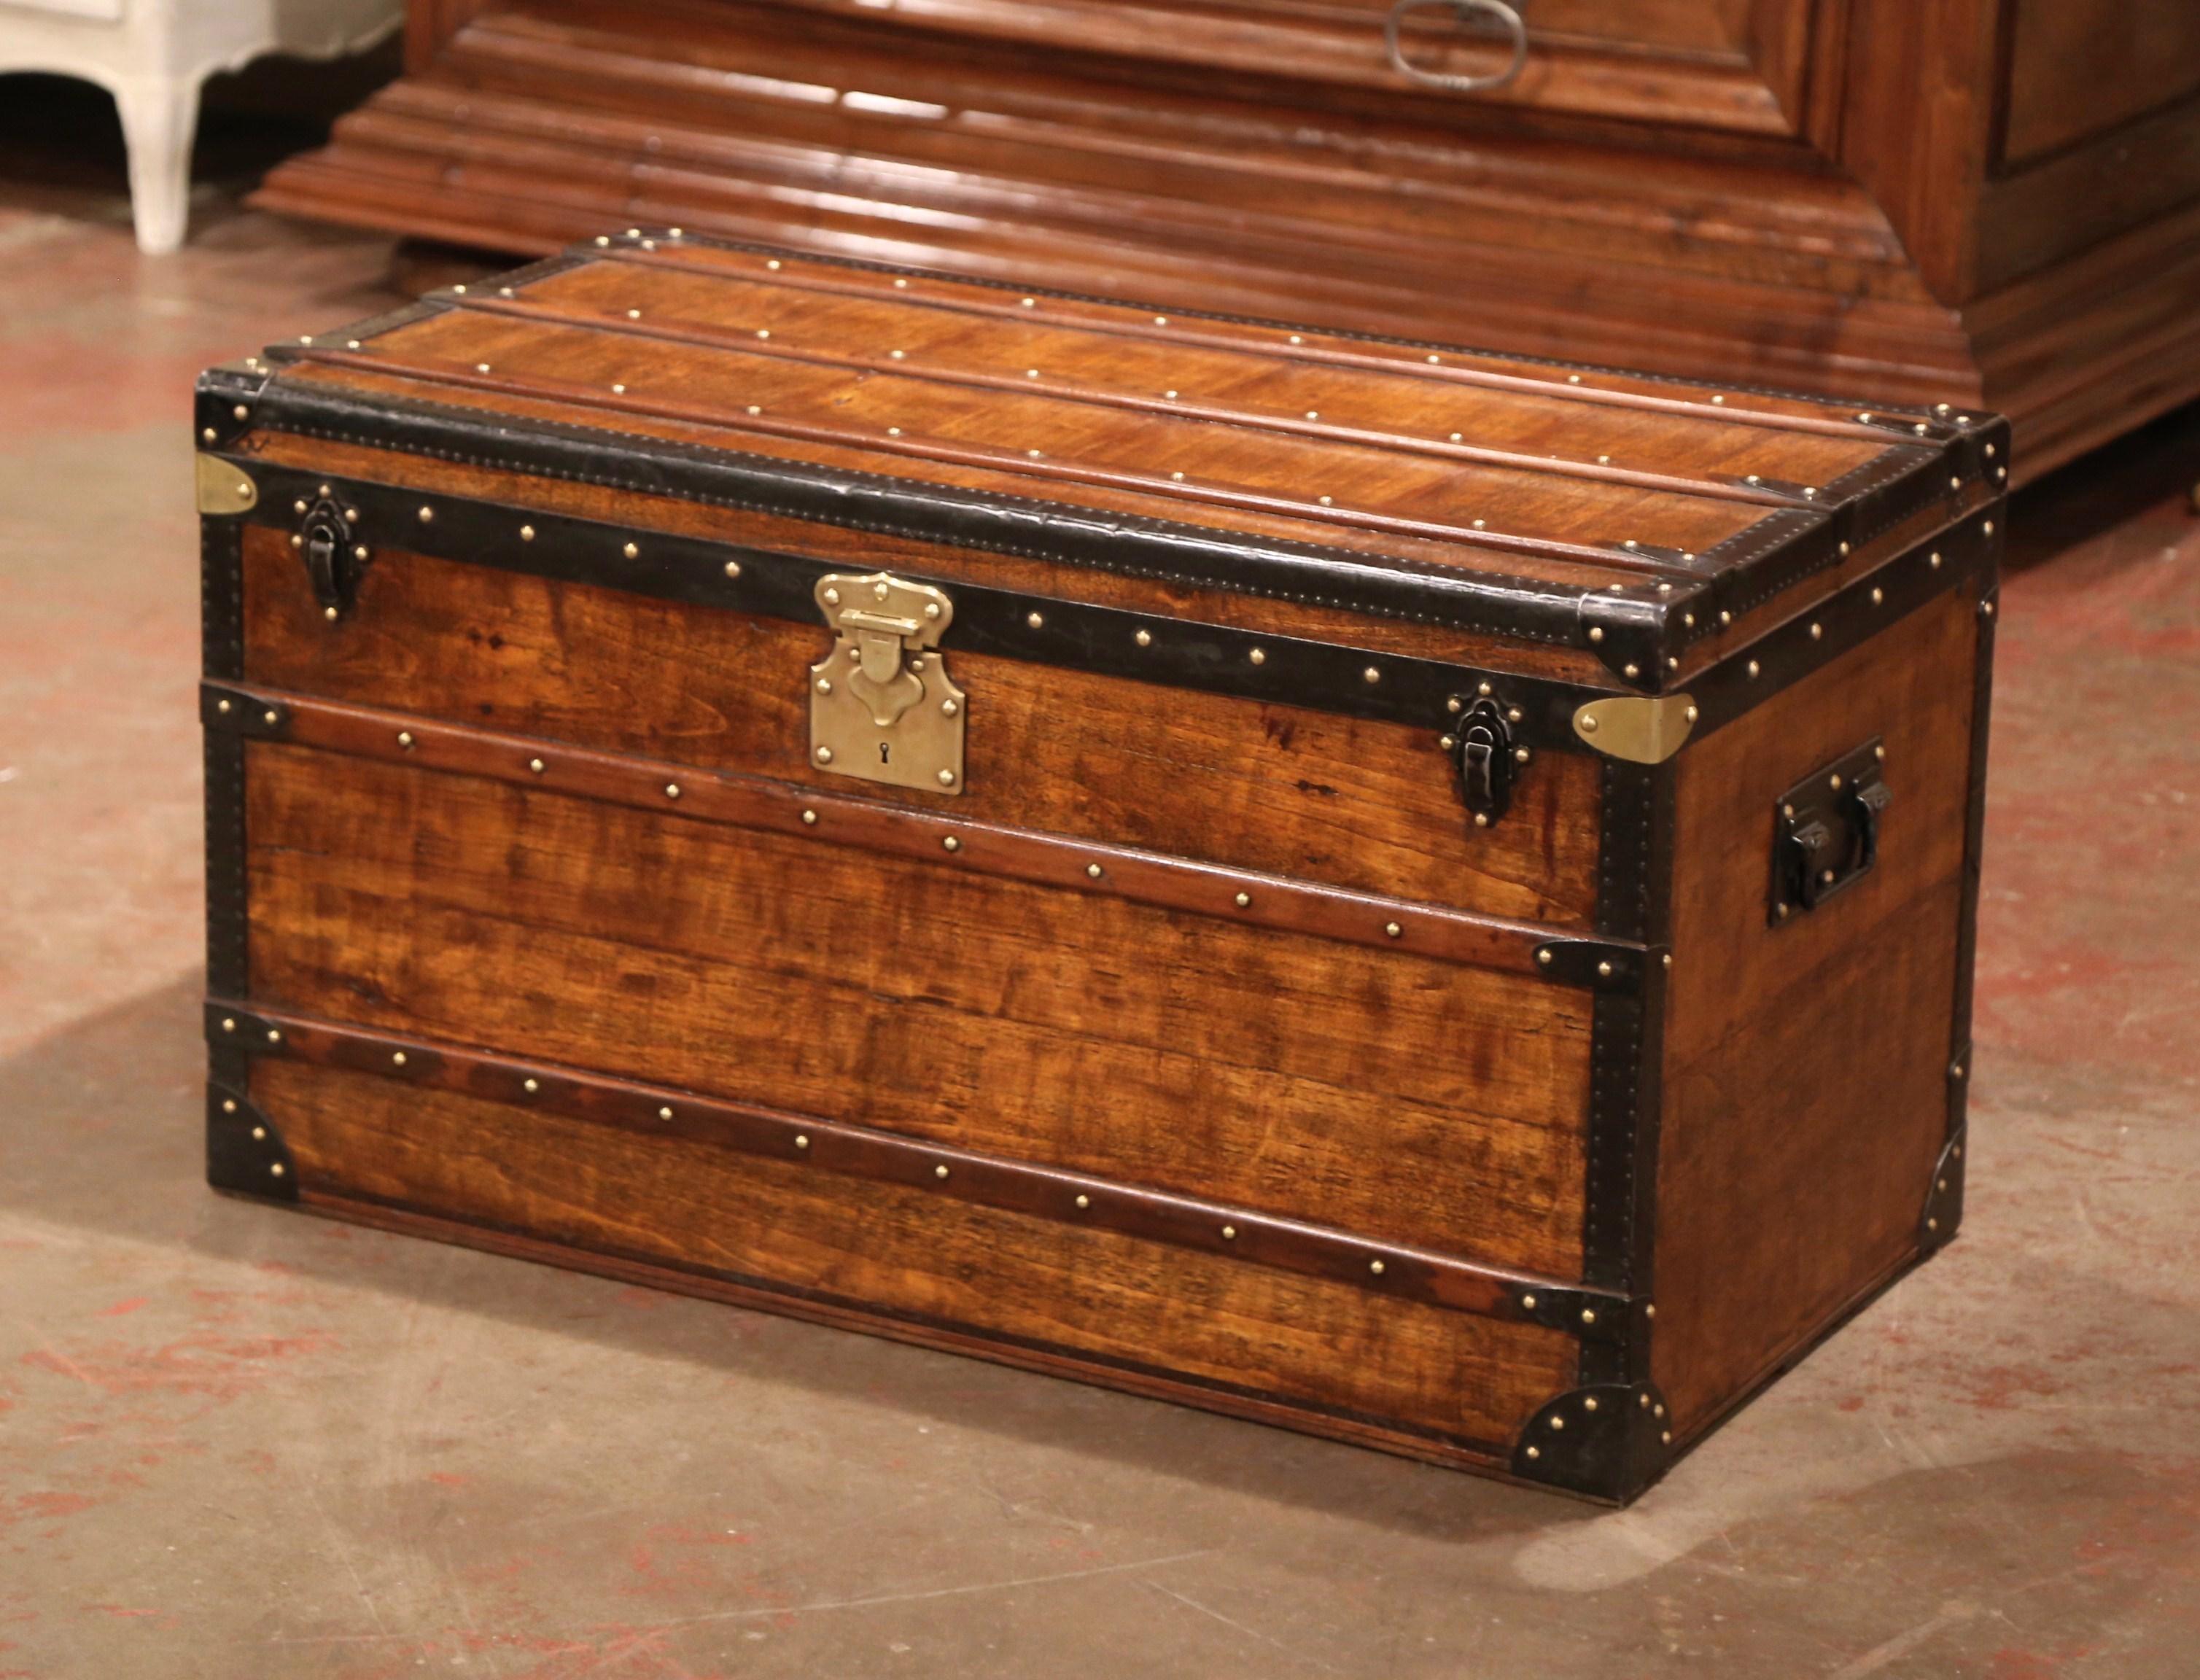 Rectangular in shape, this beautiful suitcase would make an elegant coffee table; crafted in Paris near the Champs Elysees, circa 1890 by Alexandre Velay, the fruitwood trunk with handles is finished on all four sides; it features decorative brass